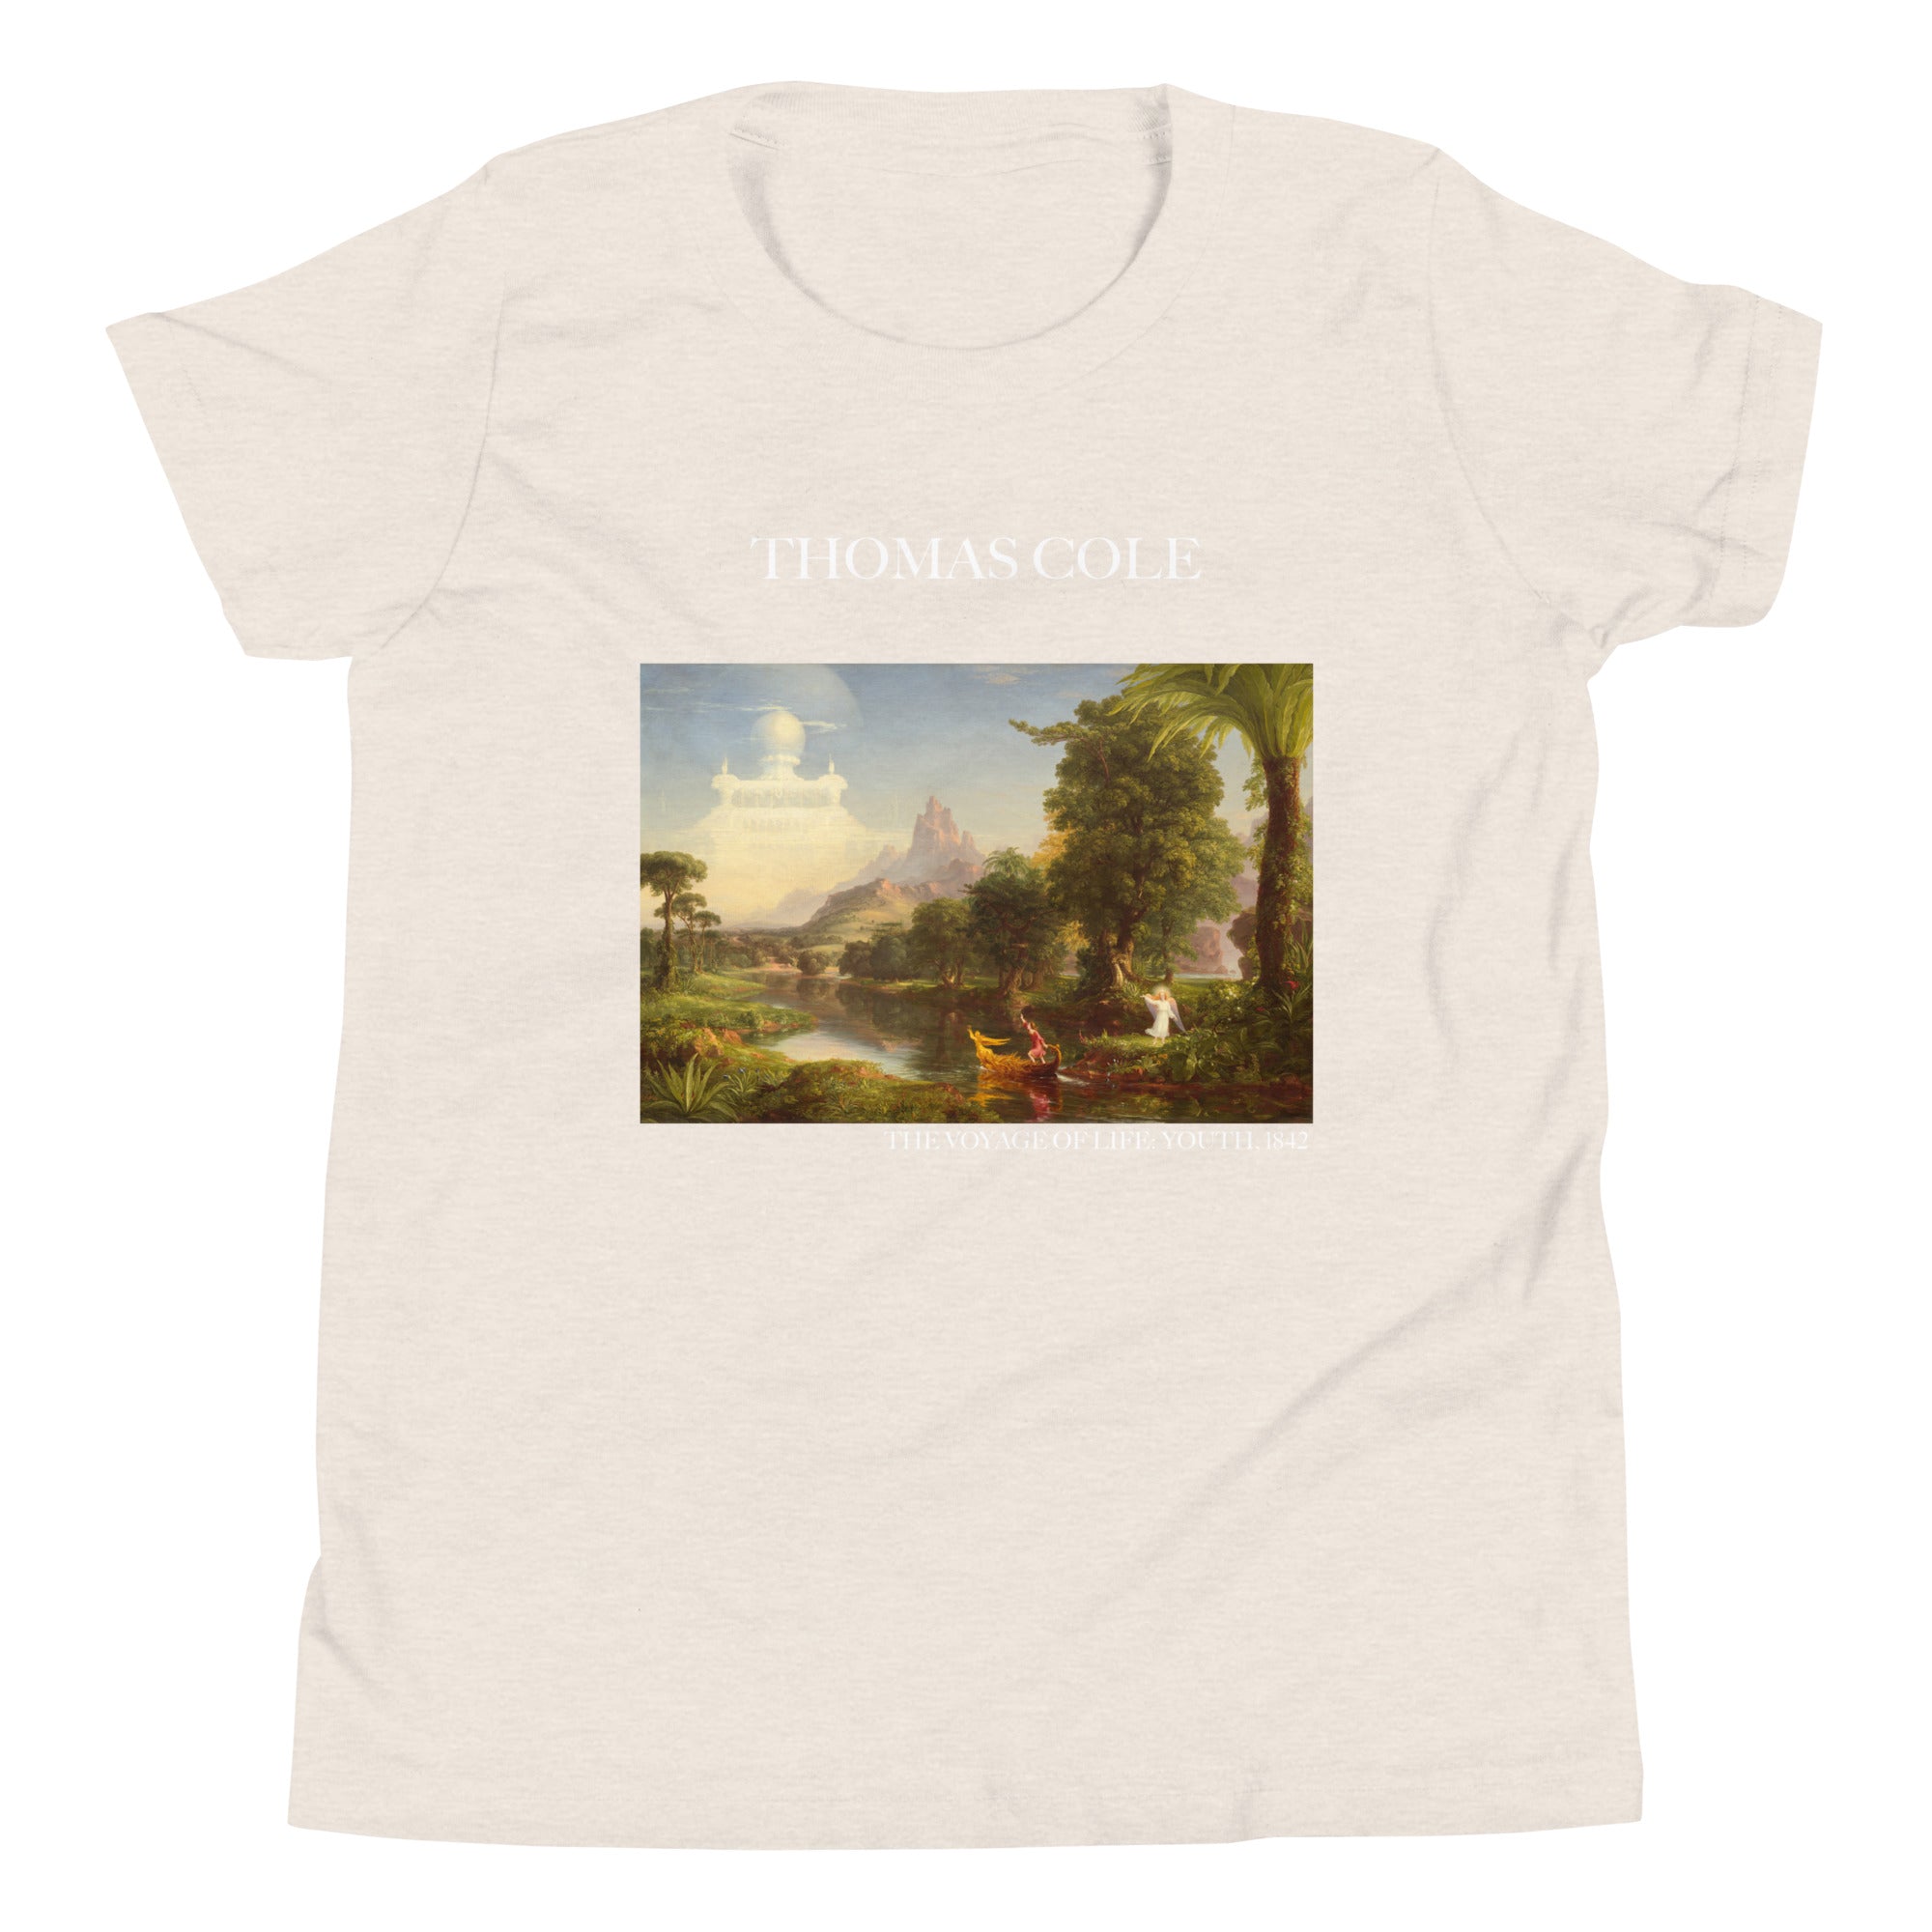 Thomas Cole 'The Voyage of Life: Youth' Famous Painting Short Sleeve T-Shirt | Premium Youth Art Tee